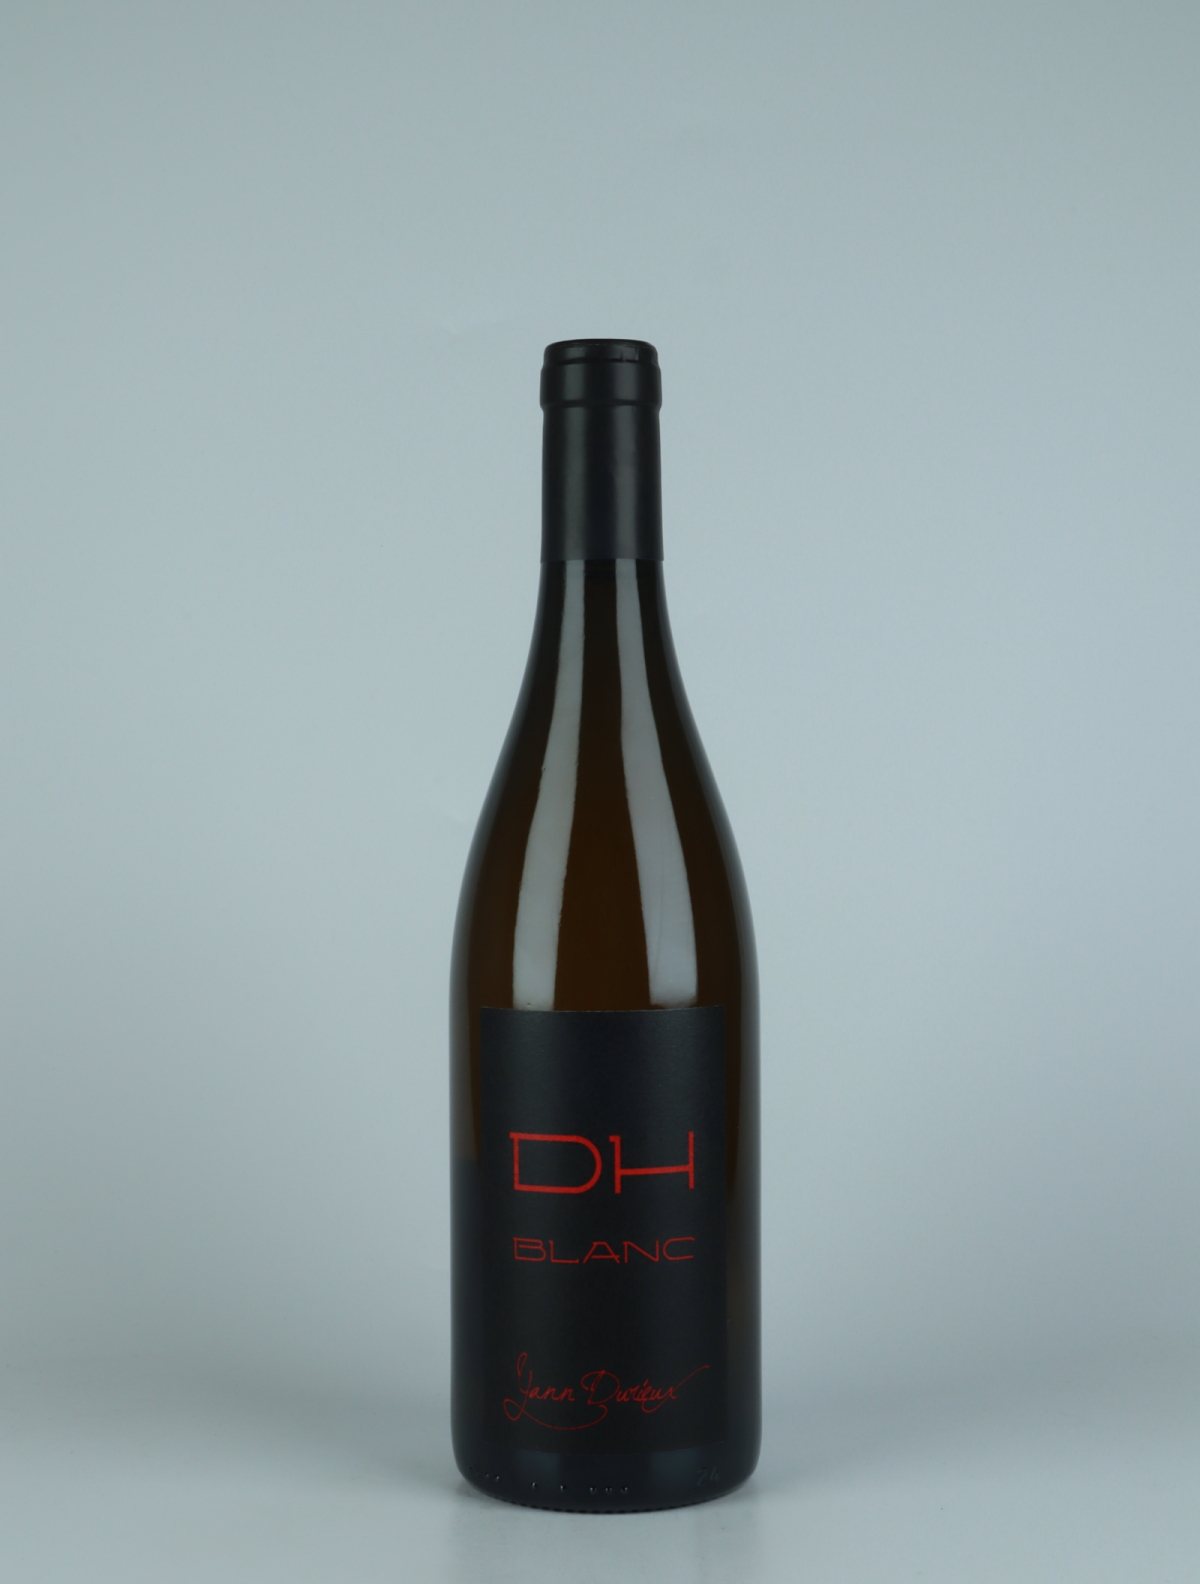 A bottle 2019 DH Blanc White wine from Yann Durieux, Burgundy in France